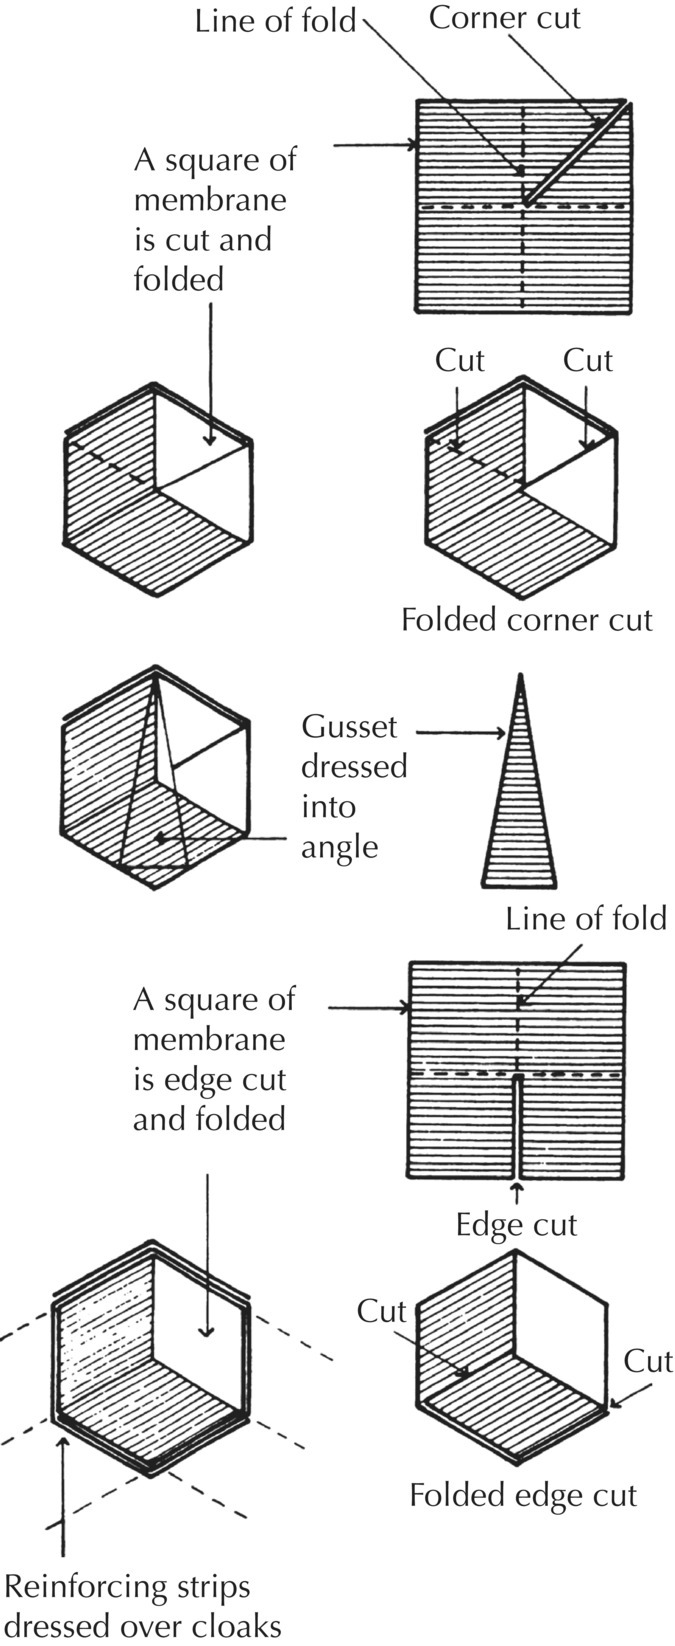 Illustrations of a shaded square divided into 4 parts having a diagonal line at top right portion labeled corner cut with line of fold indicated. A hexagon with unshaded portions labeled a square of membrane is cut and folded.